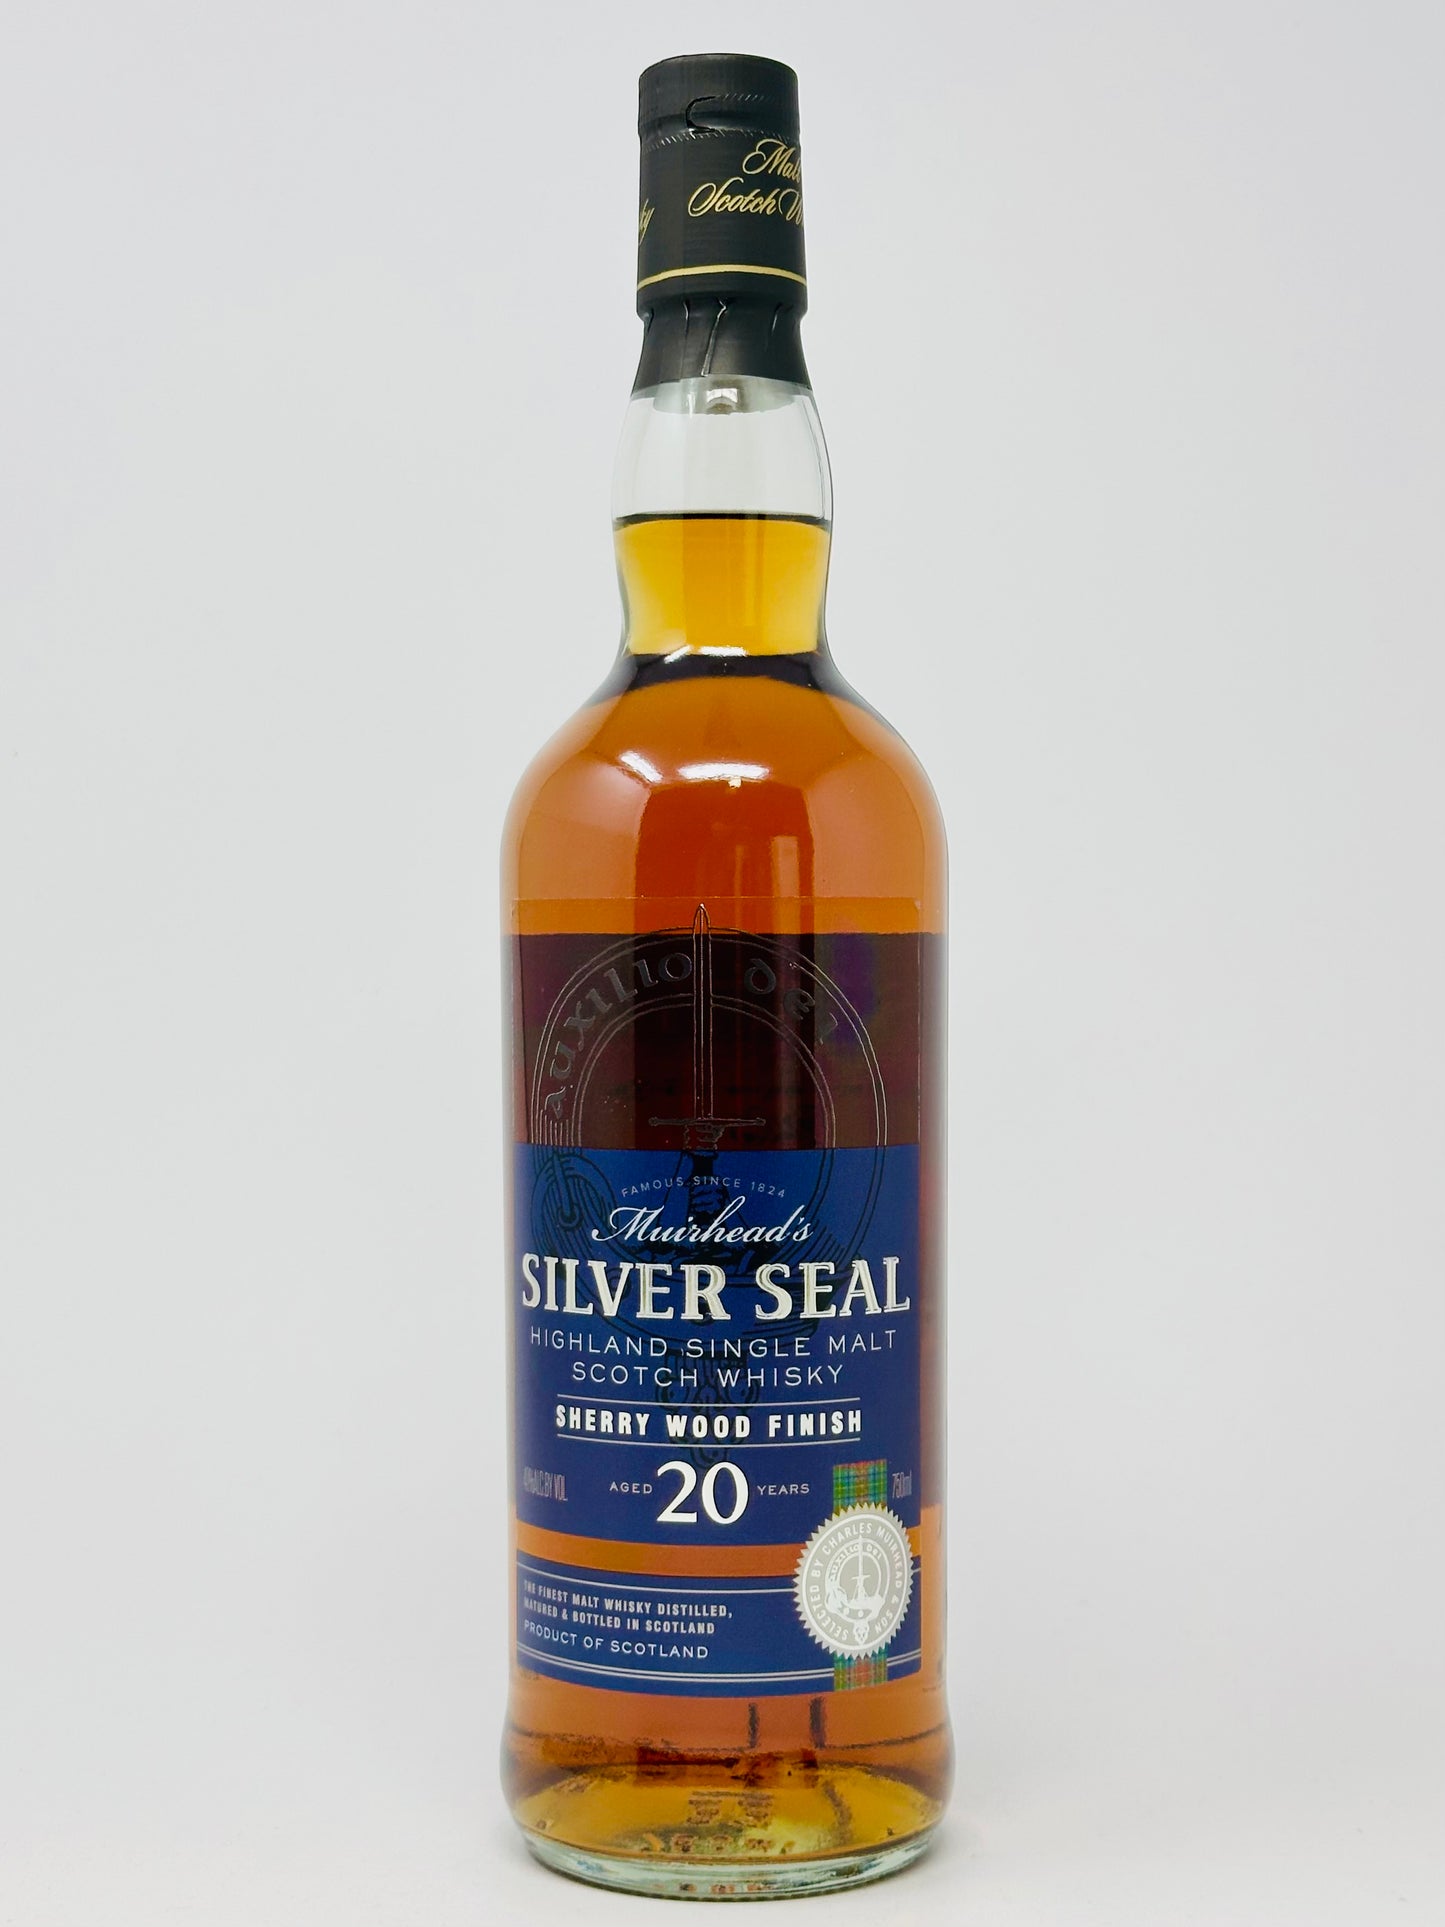 Muirhead's Silver Seal 20 Year Old Single Malt Scotch Whisky in Sherry Wood Finish Cask